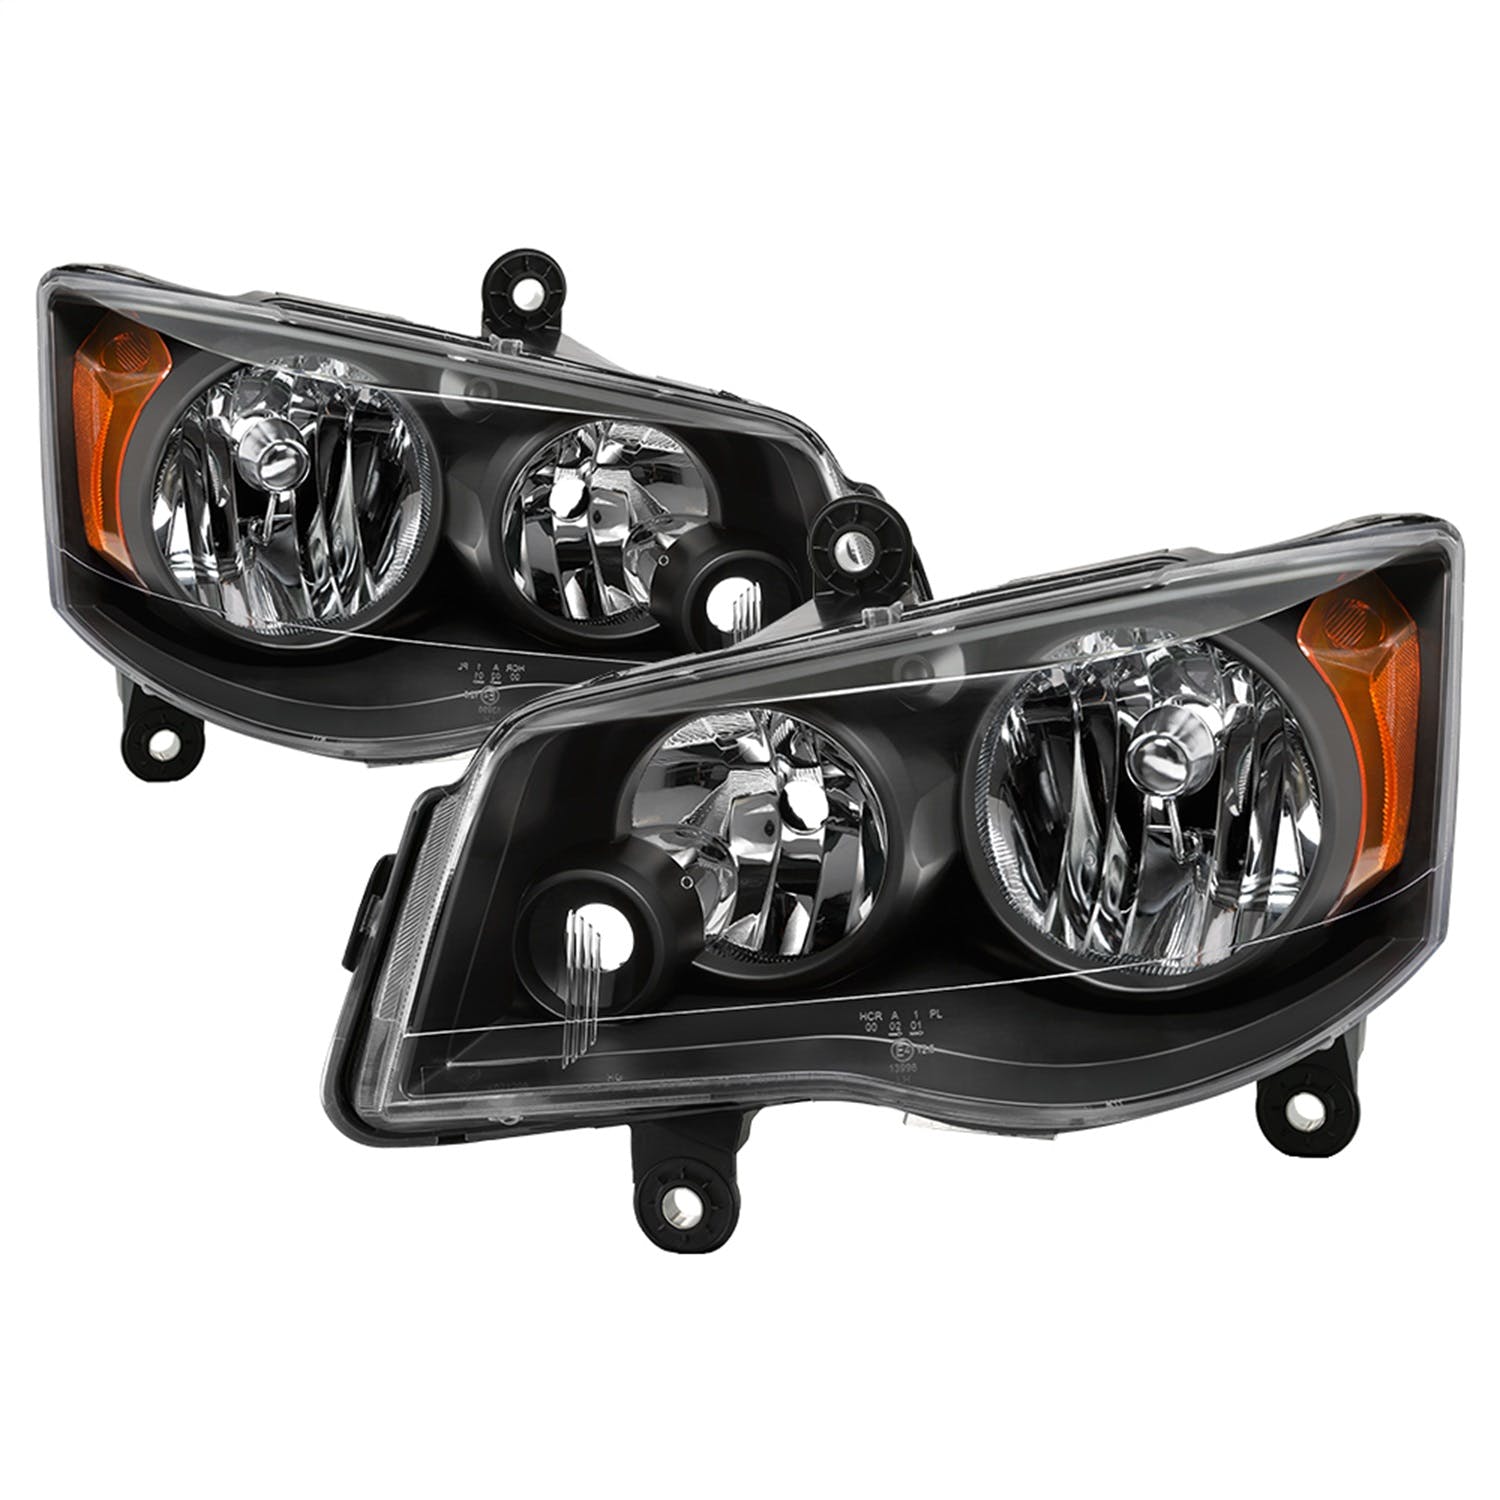 XTUNE POWER 9042492 Dodge Grand Caravan 11 17 Chrysler Town and Country 08 16 ( Does Not fit 09 10 Models with Automatic Dimming Headlights ) OEM Style Headlights Black